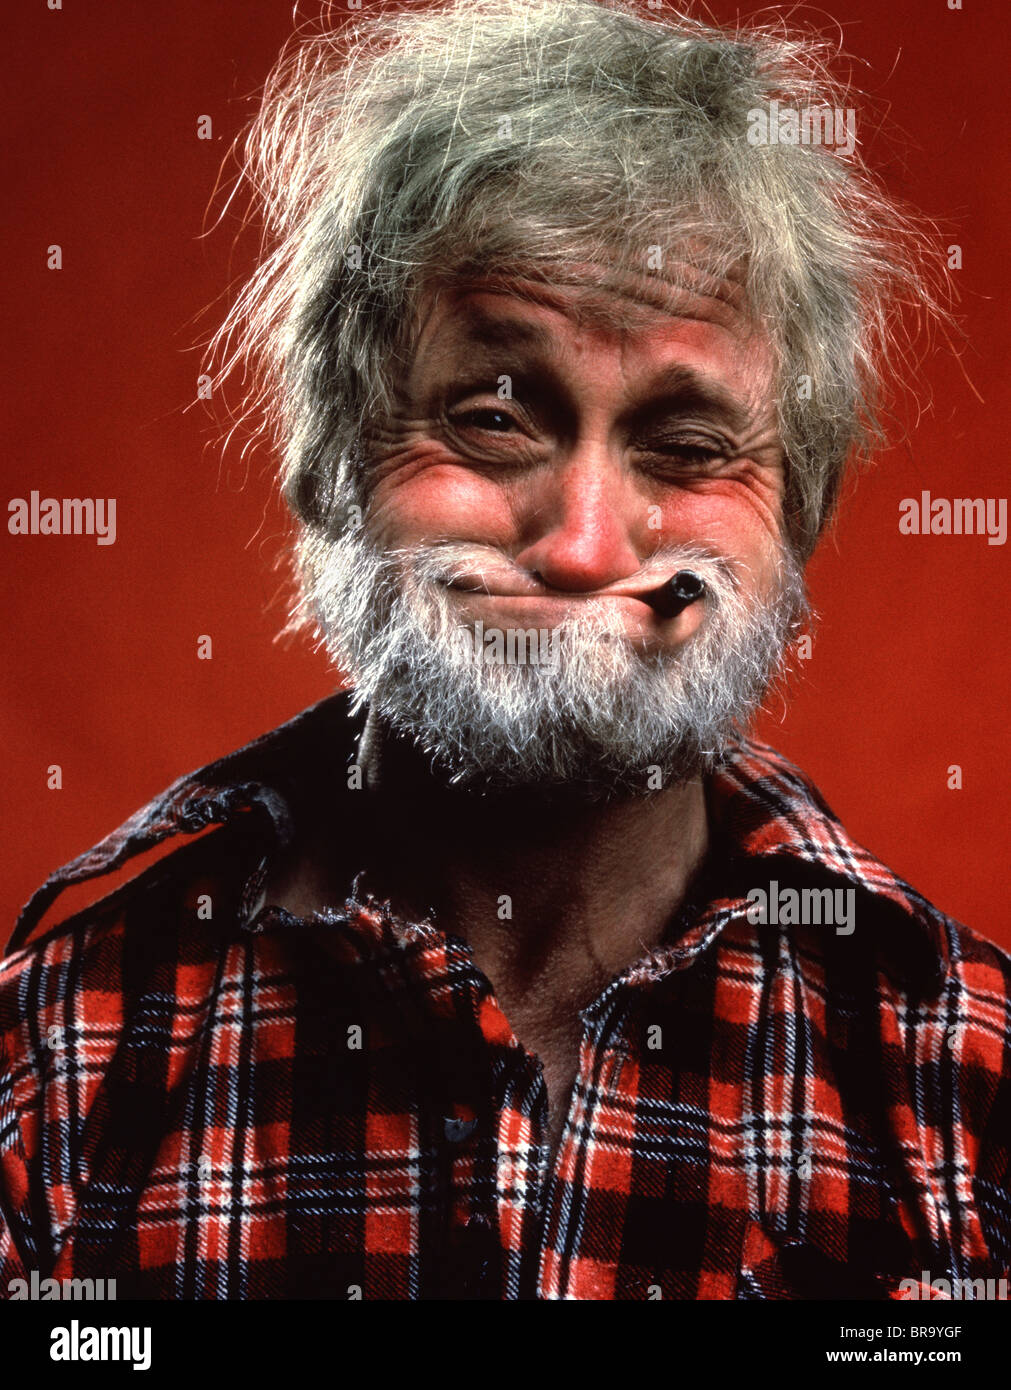 PORTRAIT OF MAN CHARACTER HILLBILLY GRAY HAIR BEARD FLANNEL SHIRT PIPE FUNNY HUMOROUS FACIAL EXPRESSION Stock Photo